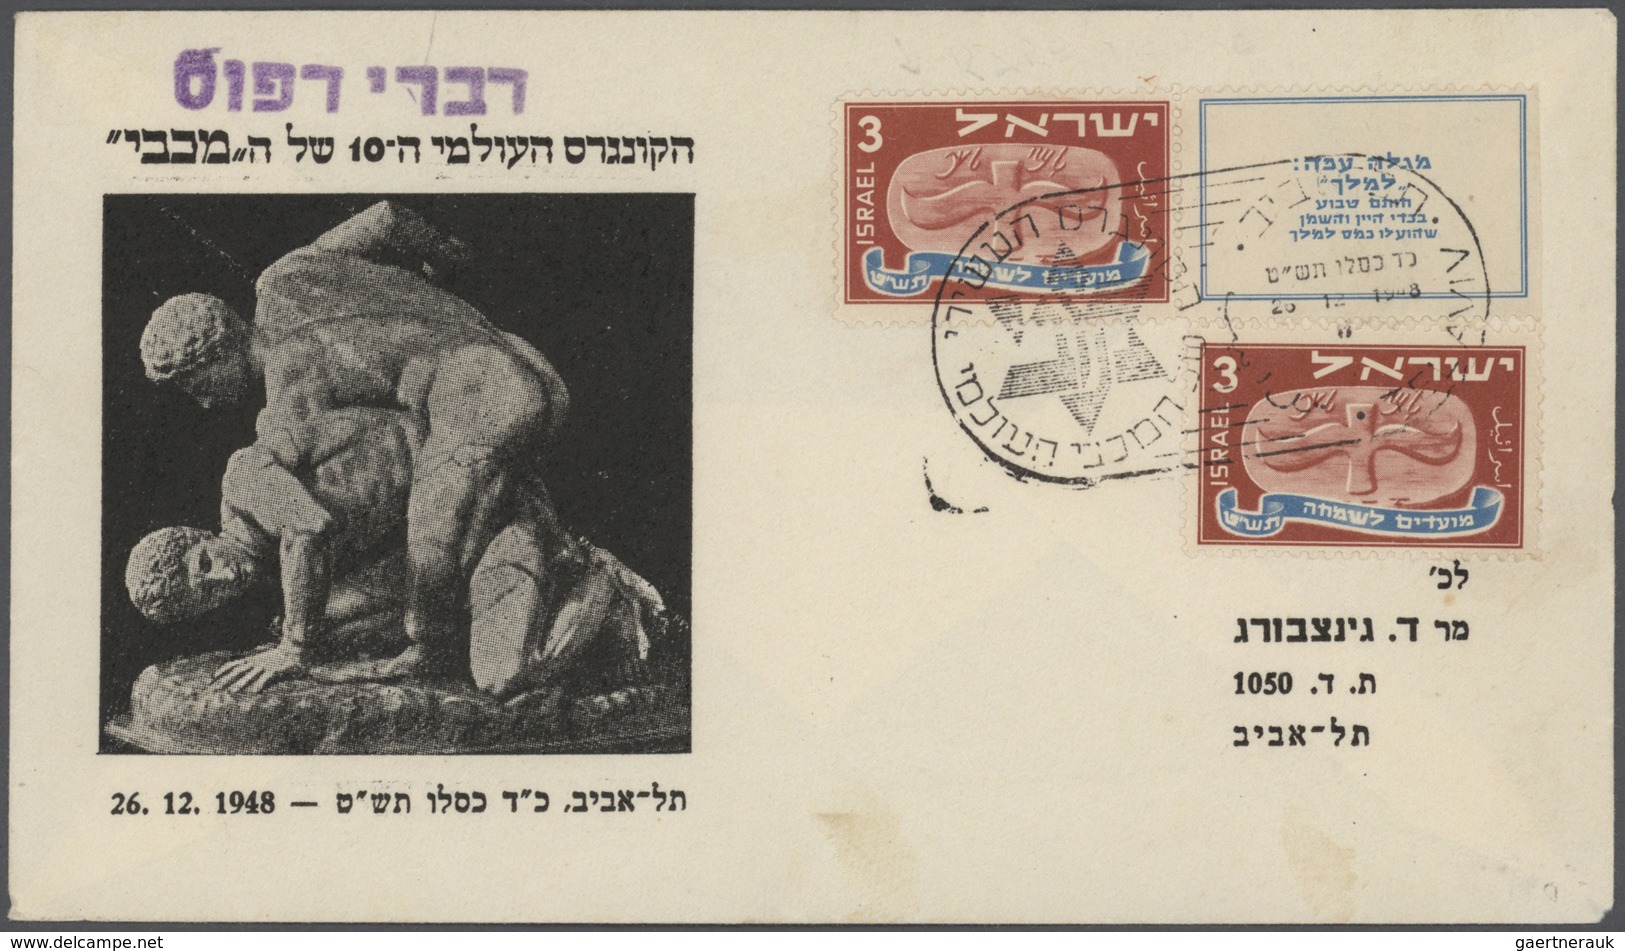 Israel: 1948/1962, accumulation of apprx. 580 covers, comprising a nice range of attractive franking